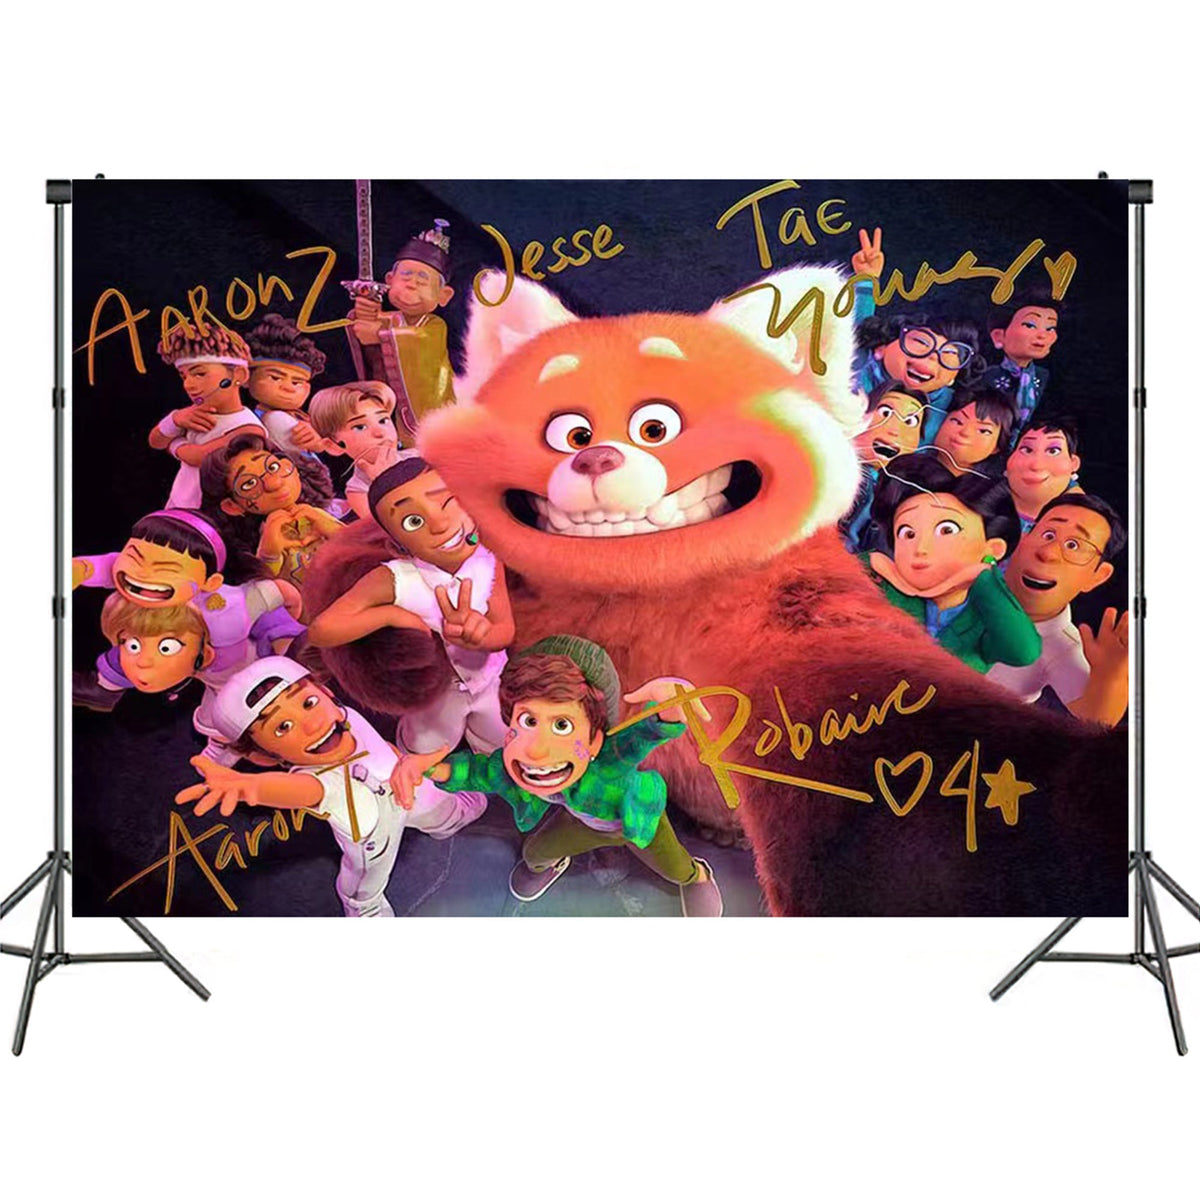 Shaoxing Keqiao Chengyou Textile Co.,Ltd Kids Birthday Turning Red Scene setter Backdrop, 39 x 59 Inches 810077657010